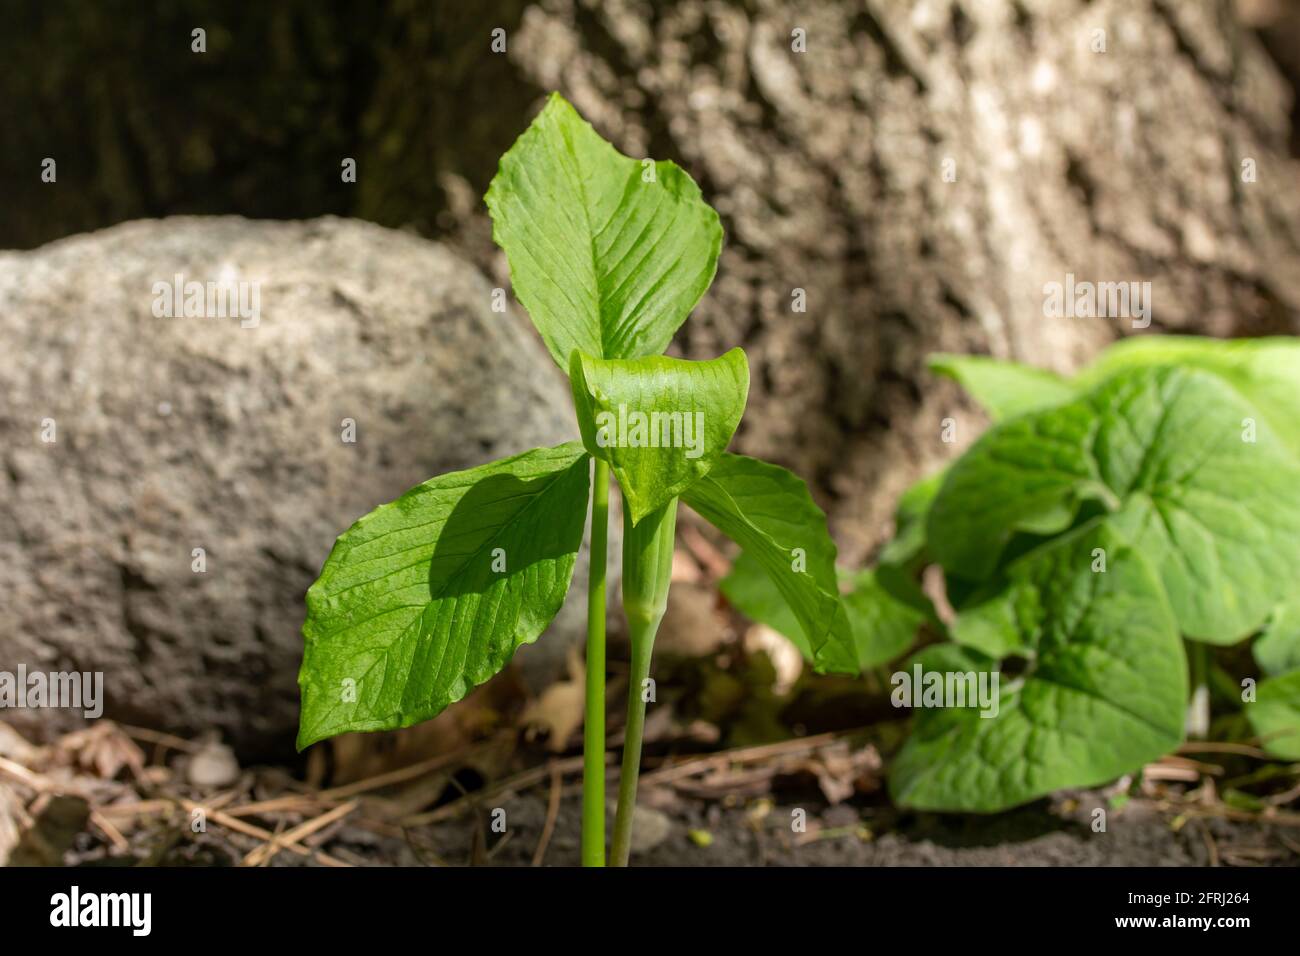 Macro view of a young green jack-in-the-pulpit (arisaema triphyllum) wildflower plant, blooming at the edge of a forest ravine Stock Photo